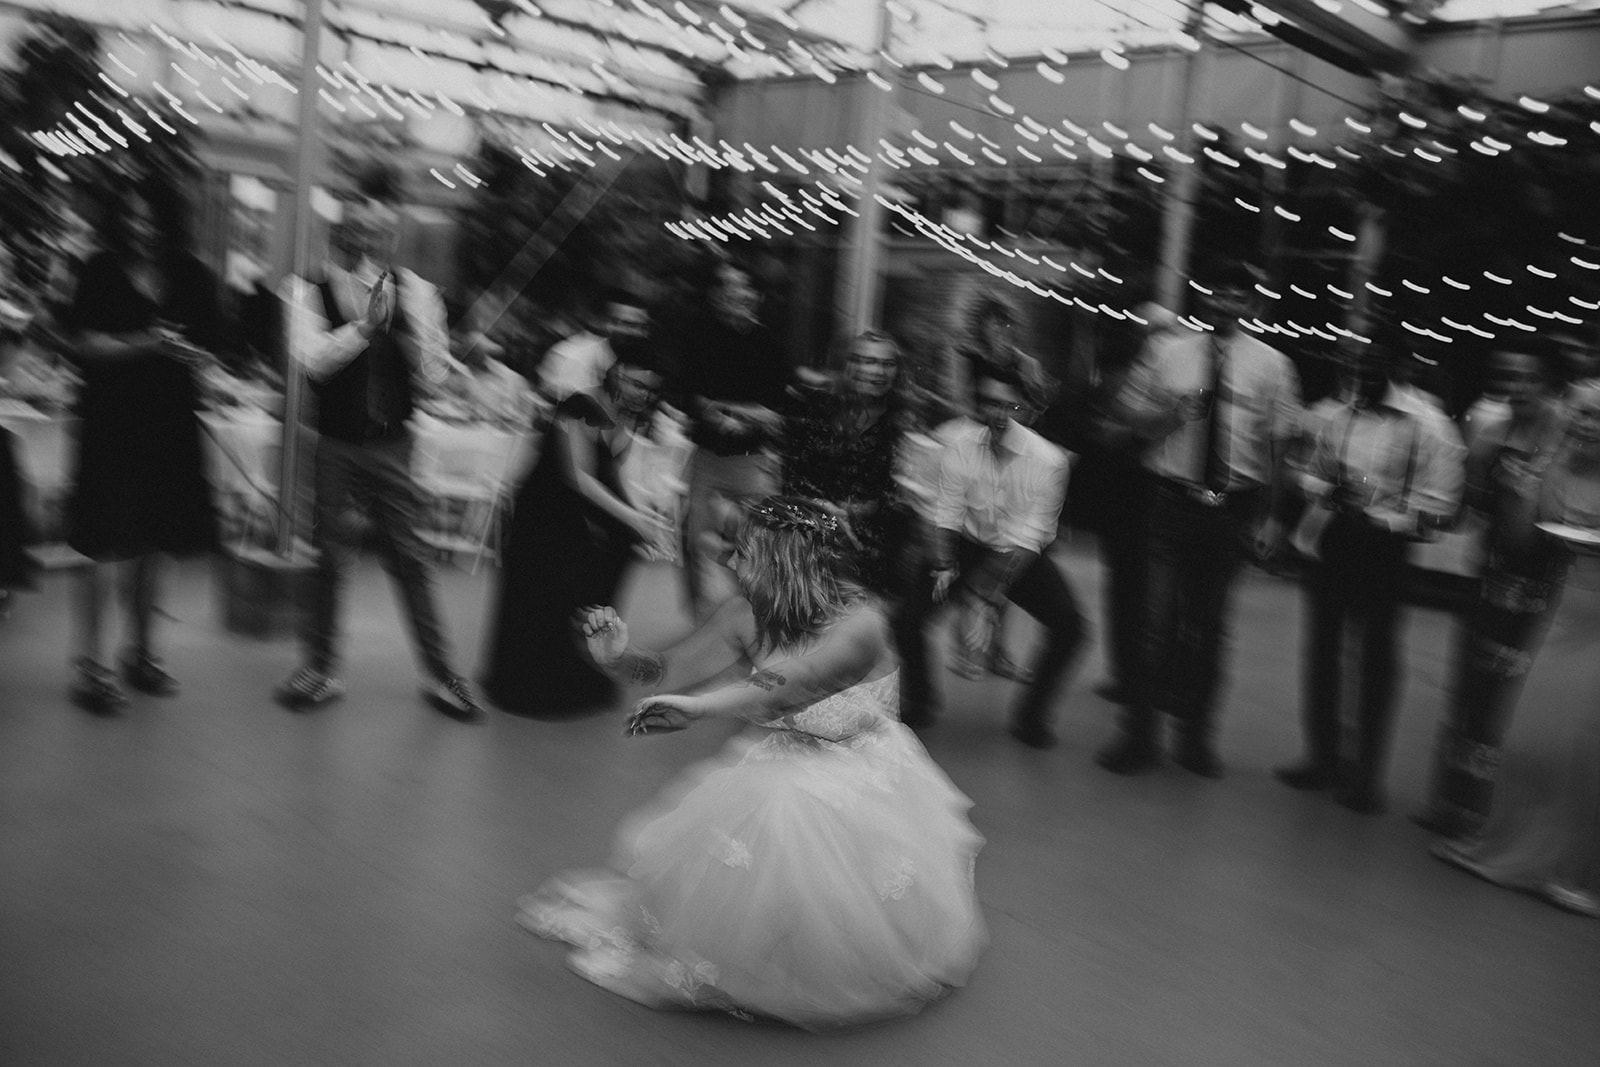 A wedding reception at the Downtown Market in Grand Rapids, Michigan